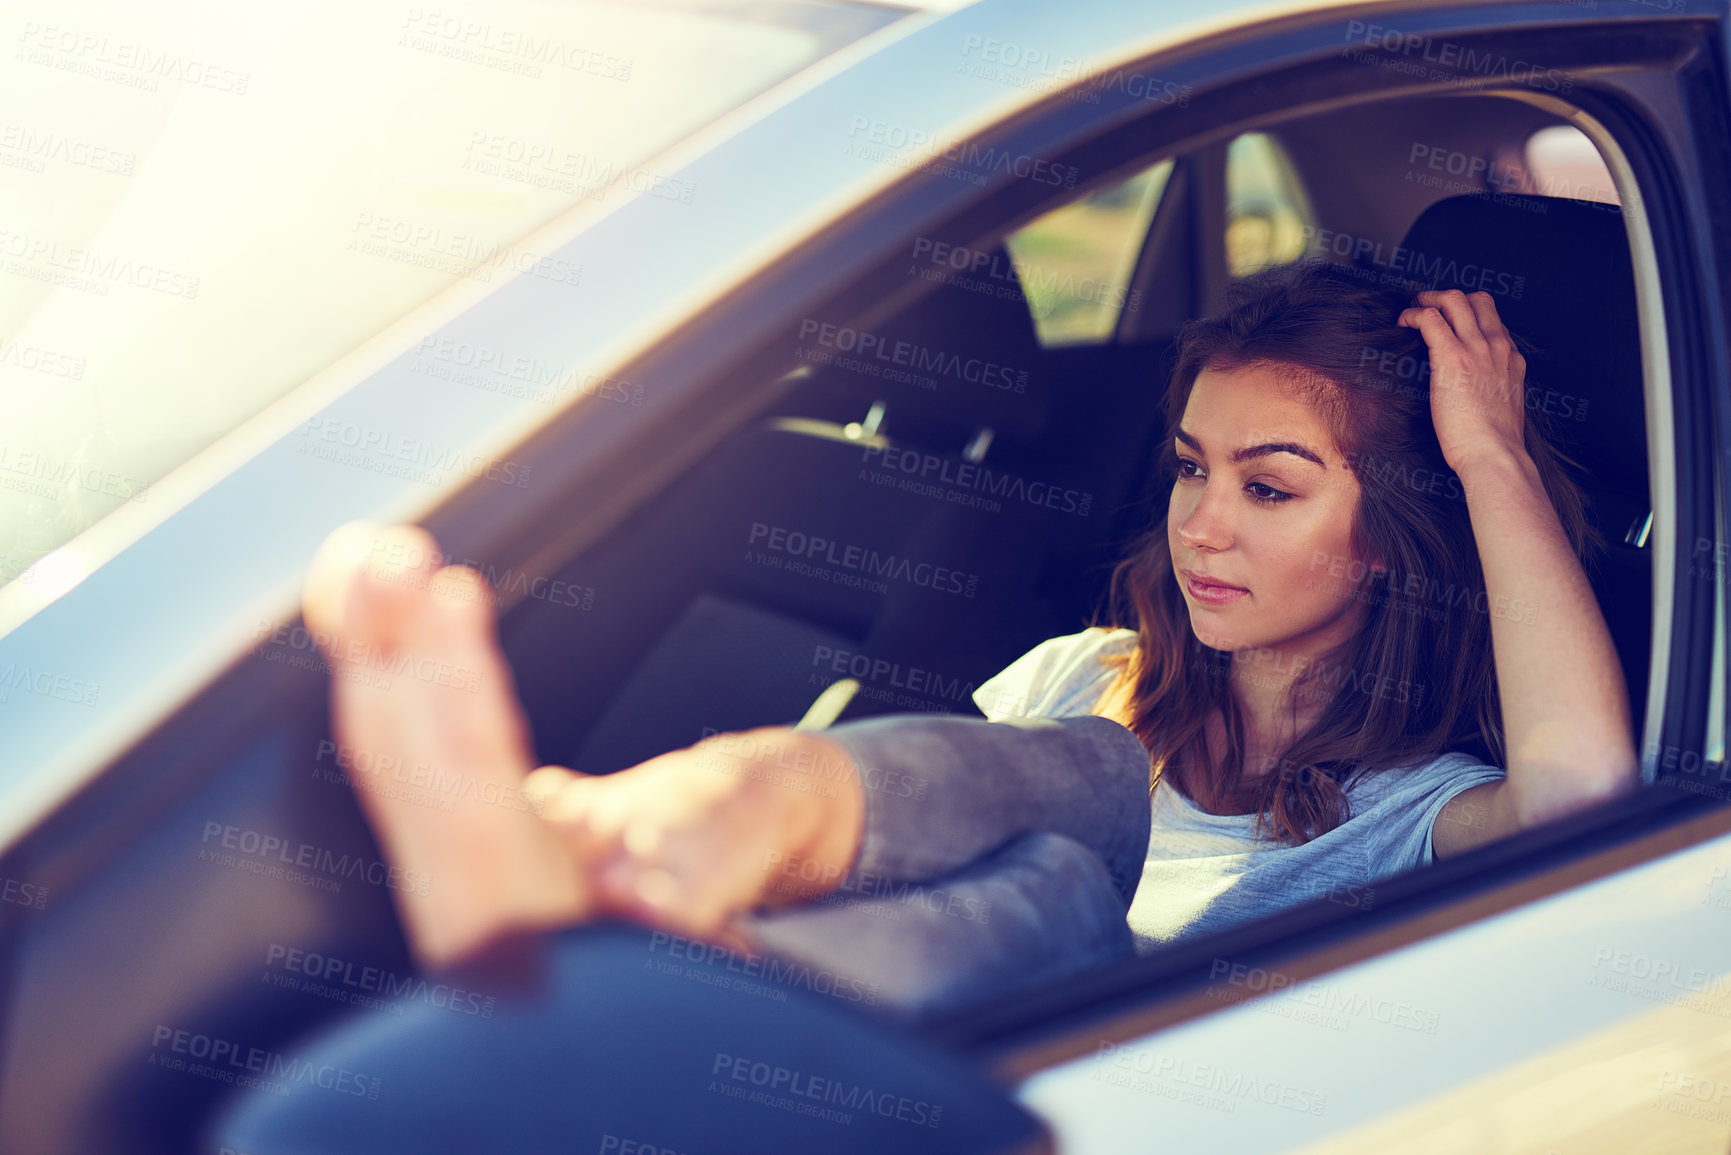 Buy stock photo Shot of a young woman sitting in her car